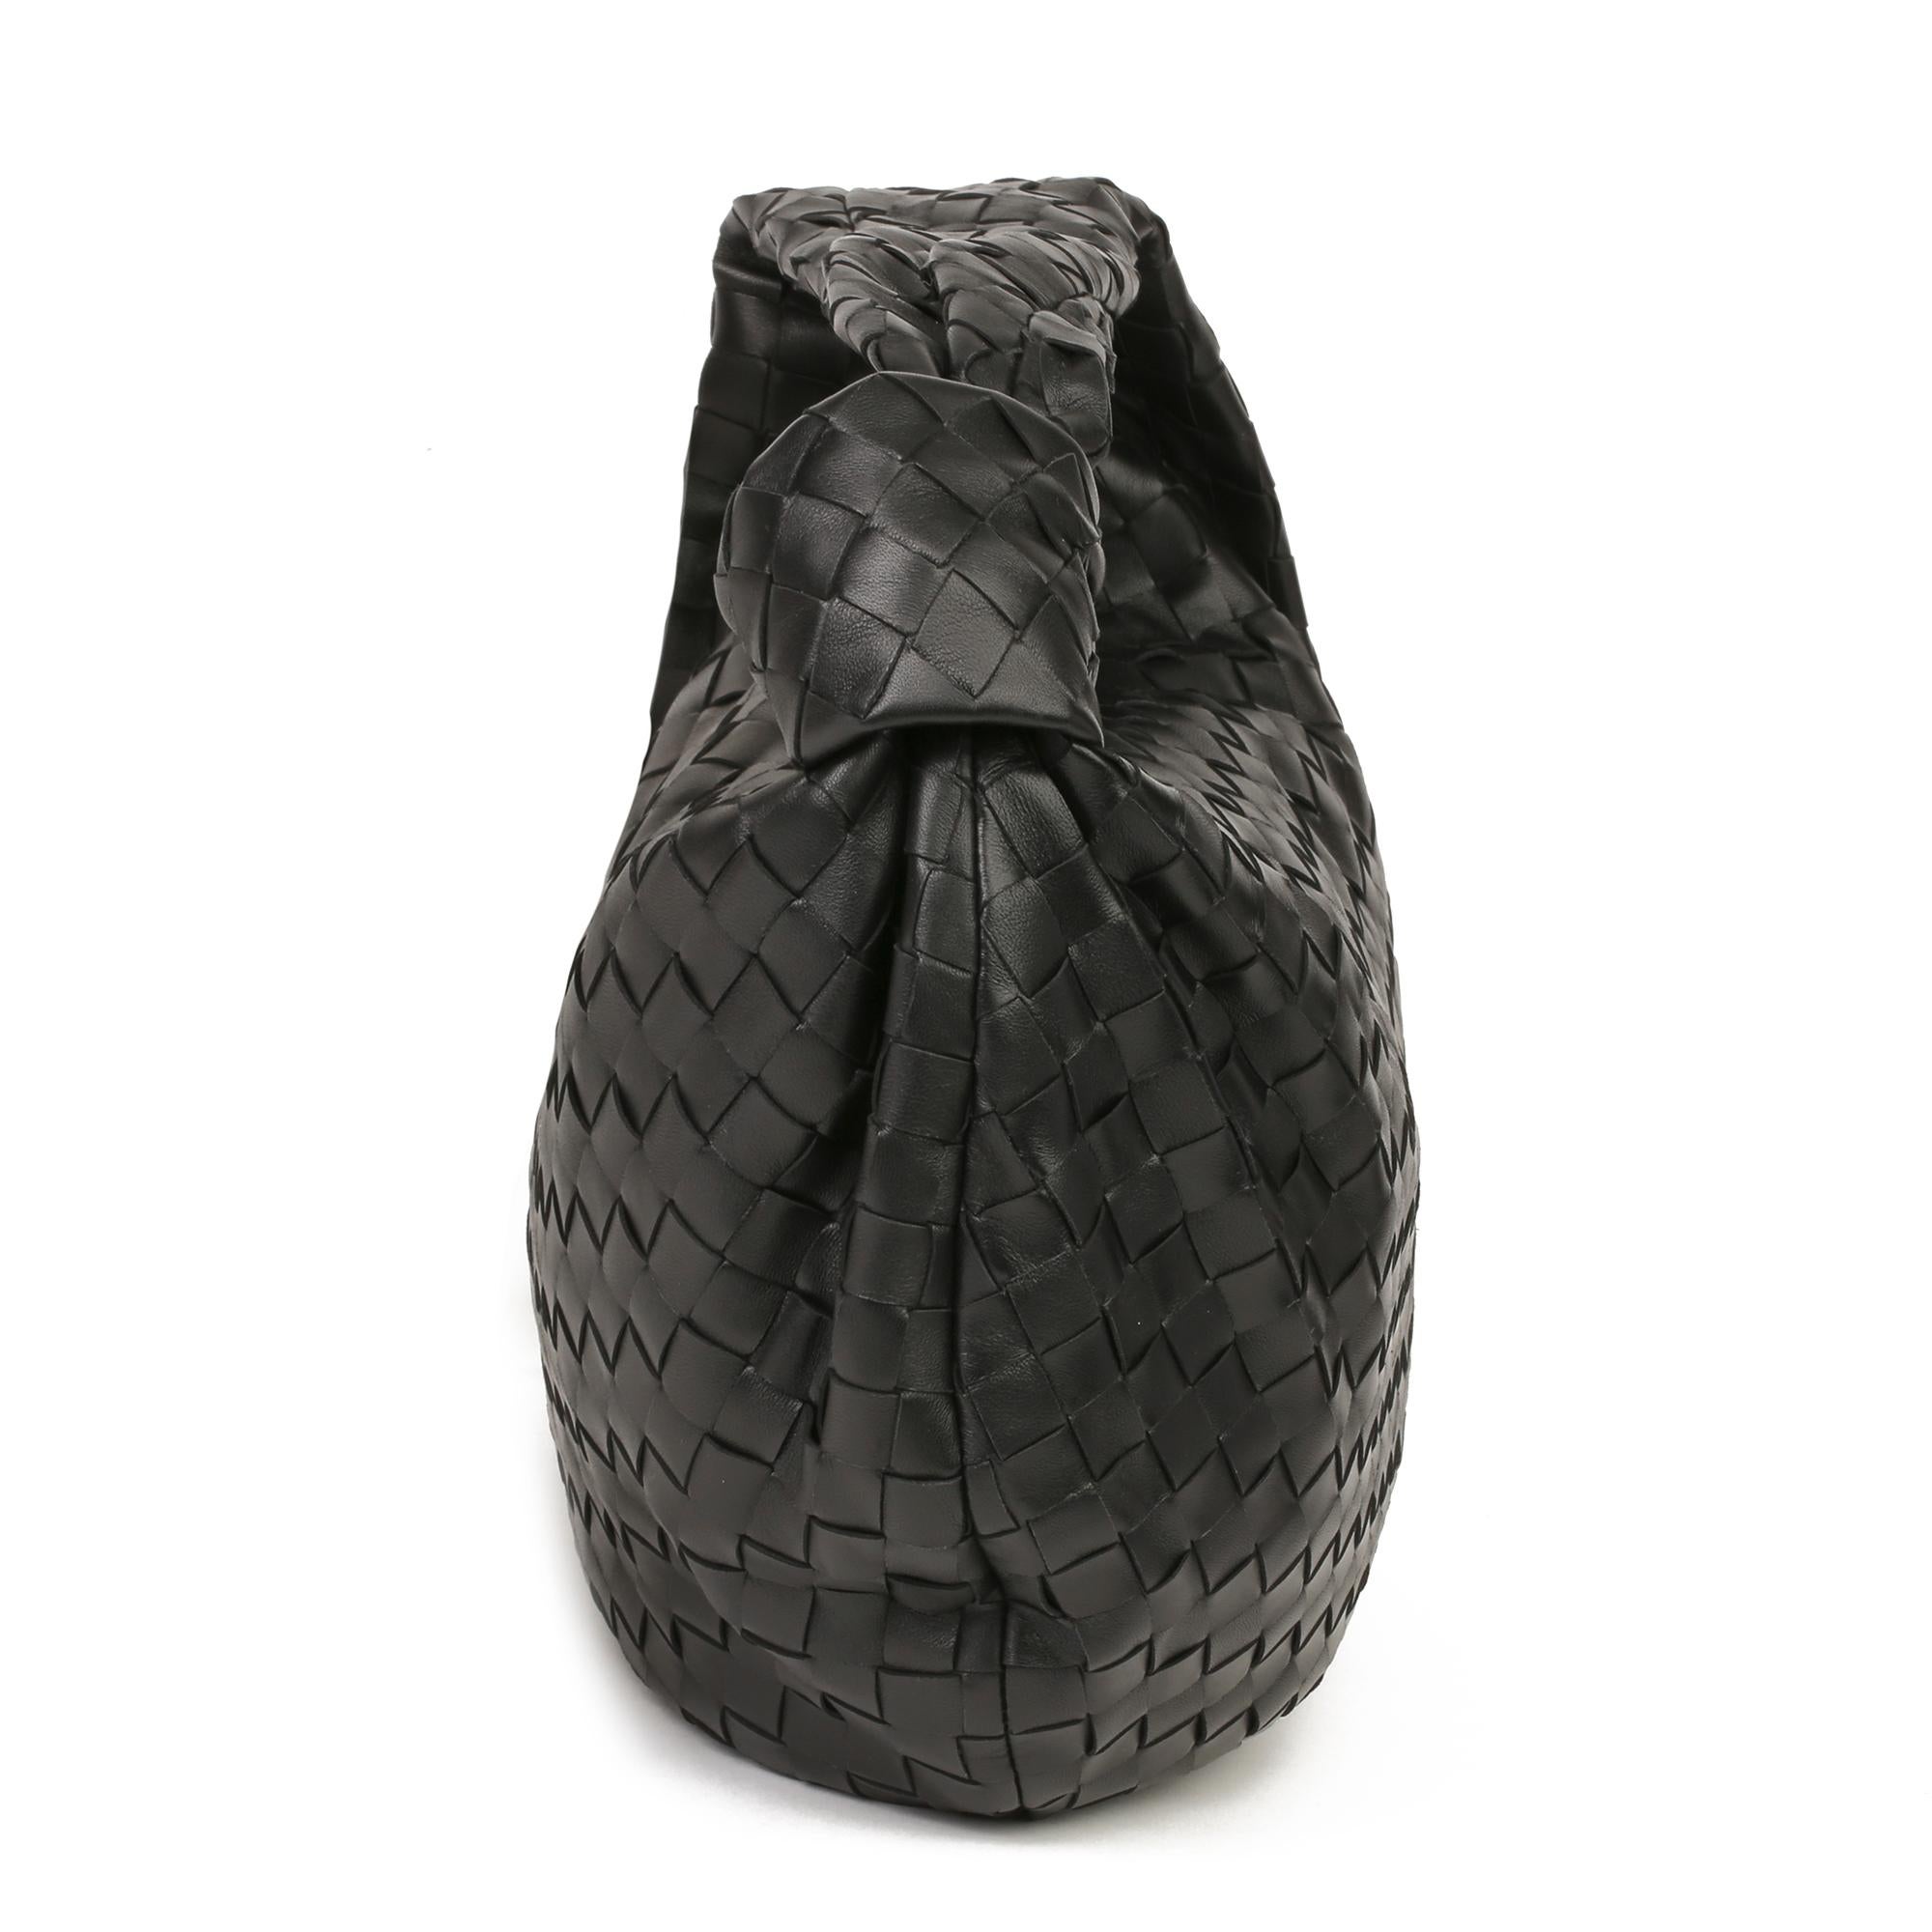 BOTTEGA VENETA
Black Intrecciato Woven Calfskin Leather The Small Jodie

Xupes Reference: HB3786
Serial Number: B08956592W
Age (Circa): 2020
Accompanied By: Bottega Veneta Dust Bag, Care Booklet
Authenticity Details: Date Stamp (Made in Italy)